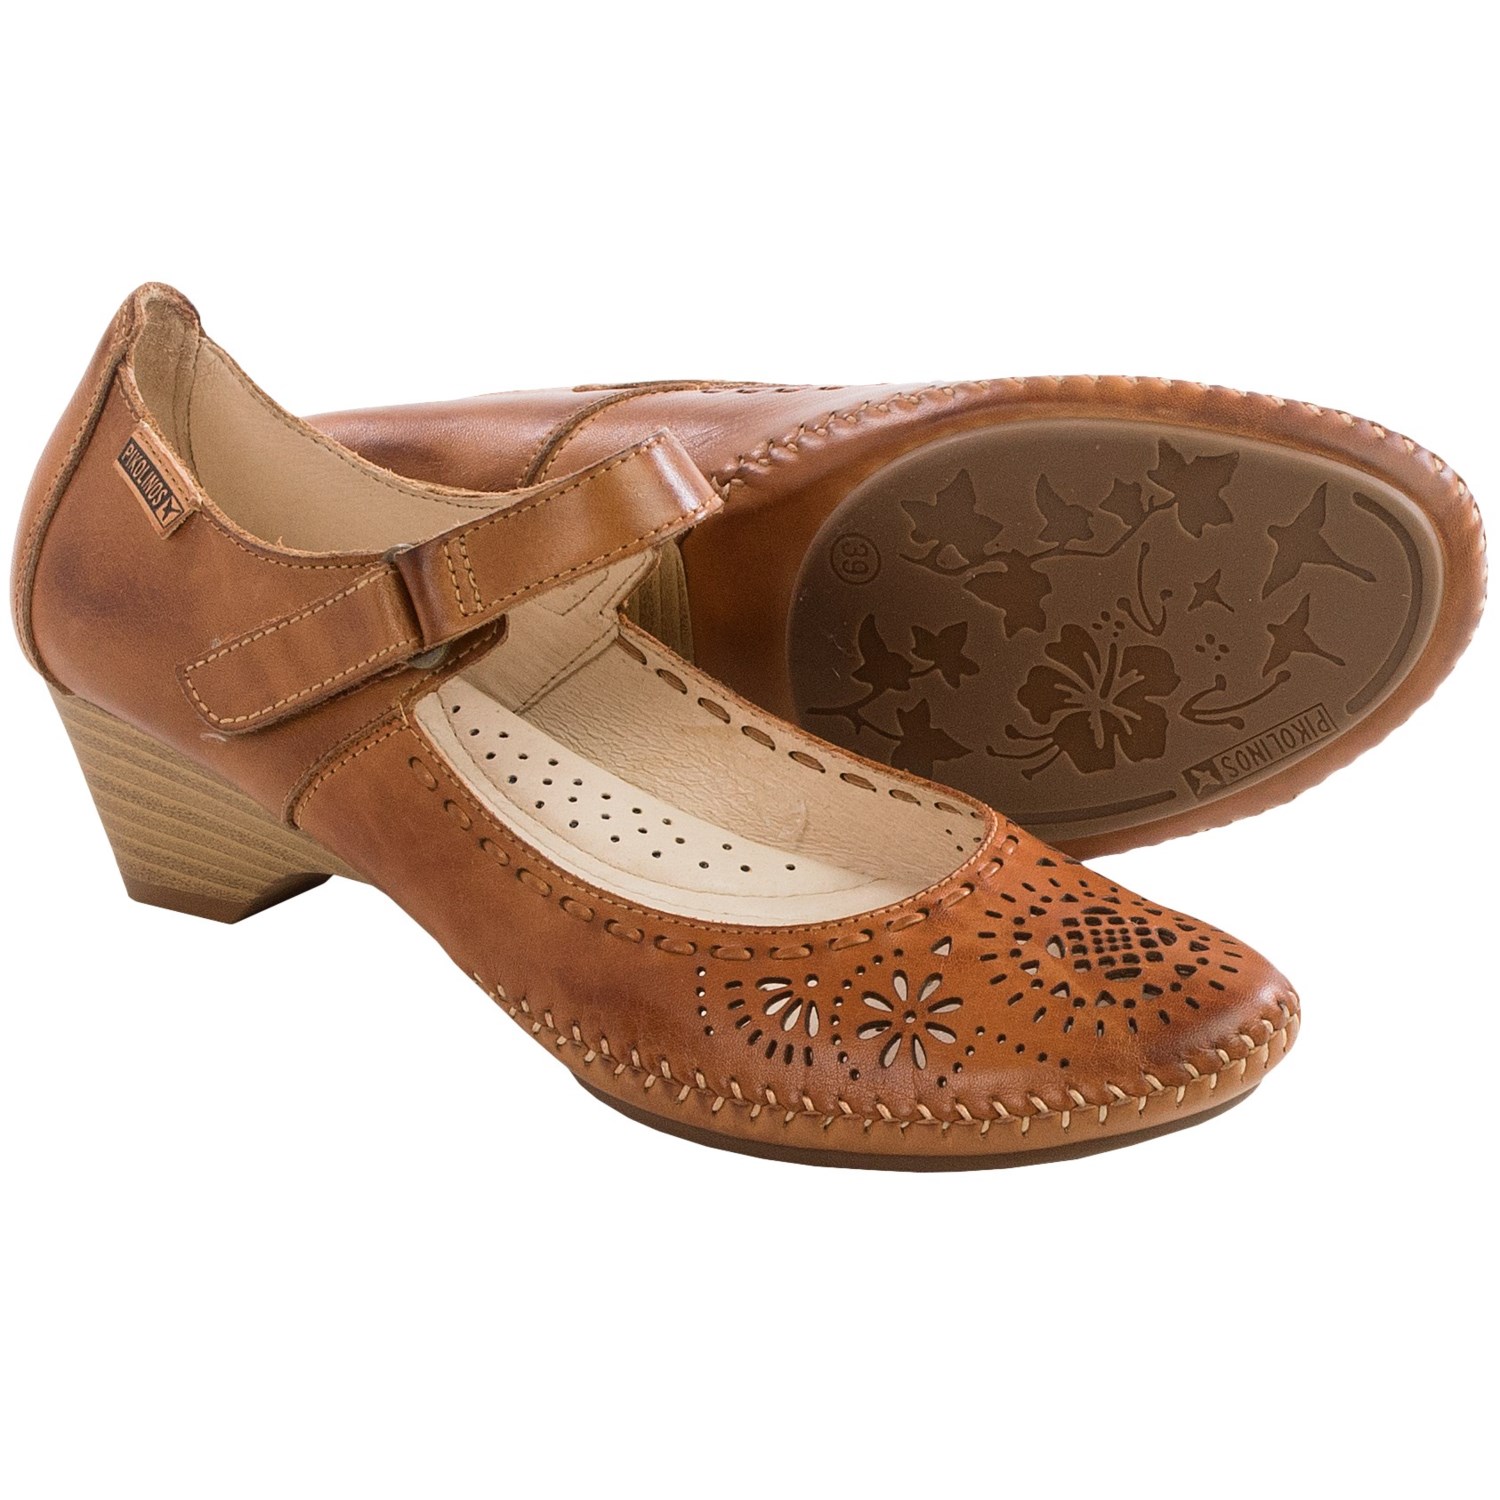 Pikolinos Bariloche Leather Pumps (For Women) - Save 52%